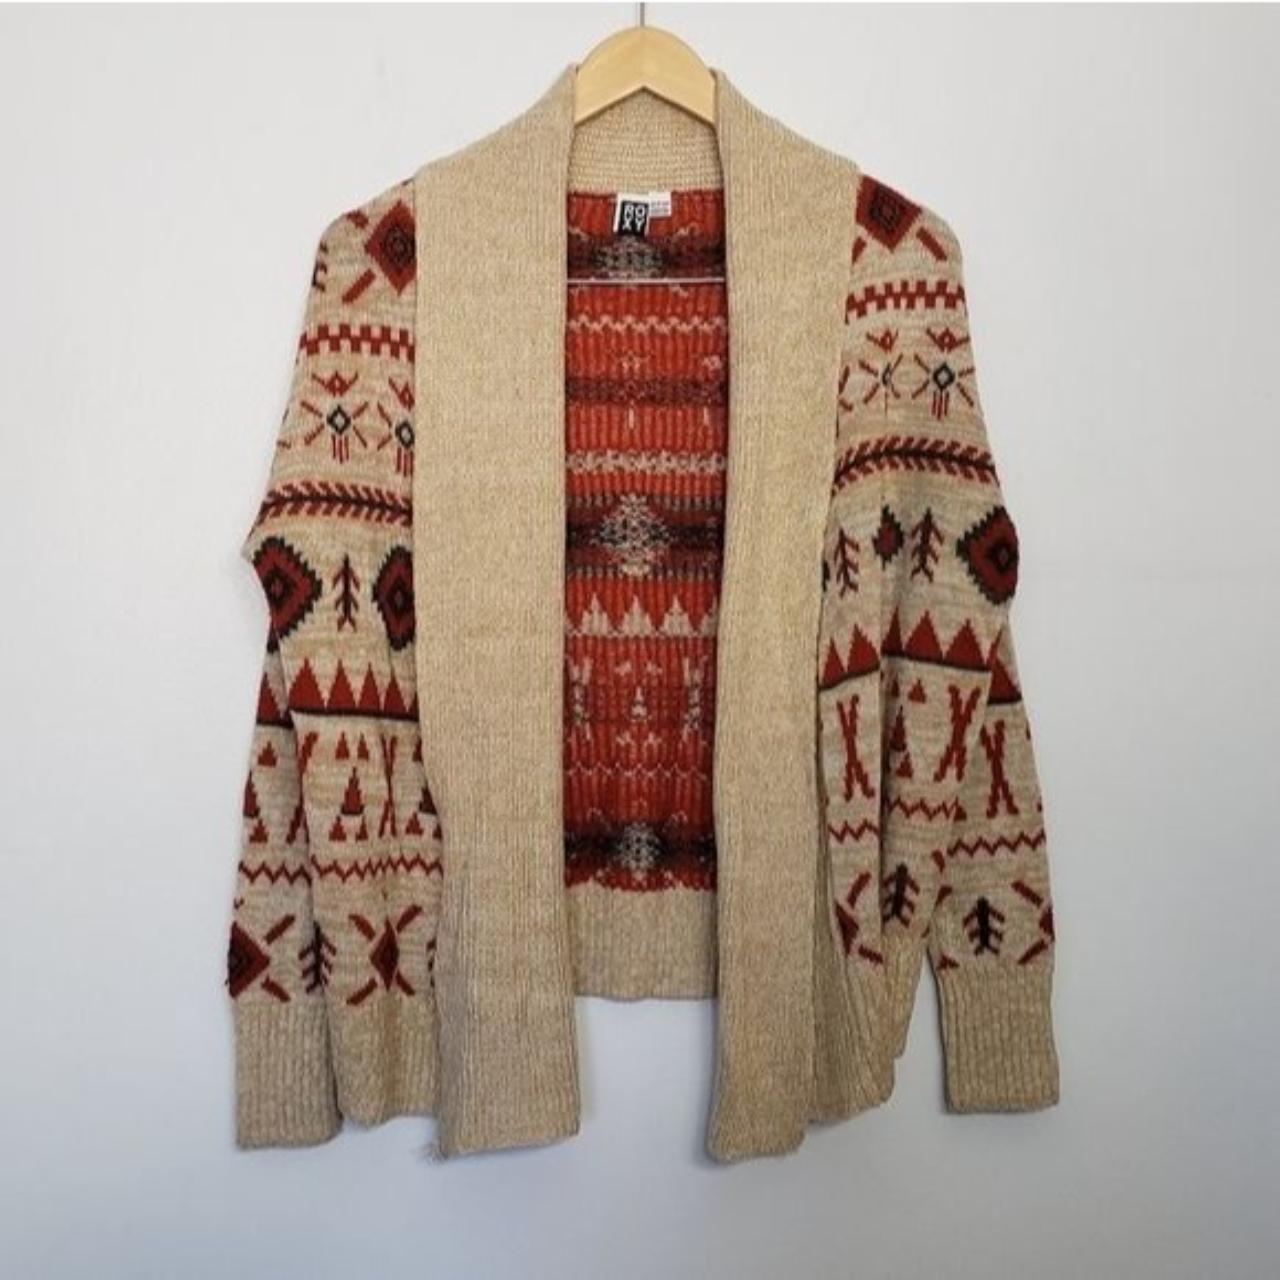 Product Image 1 - Roxy tribal open front cardigan

Gently